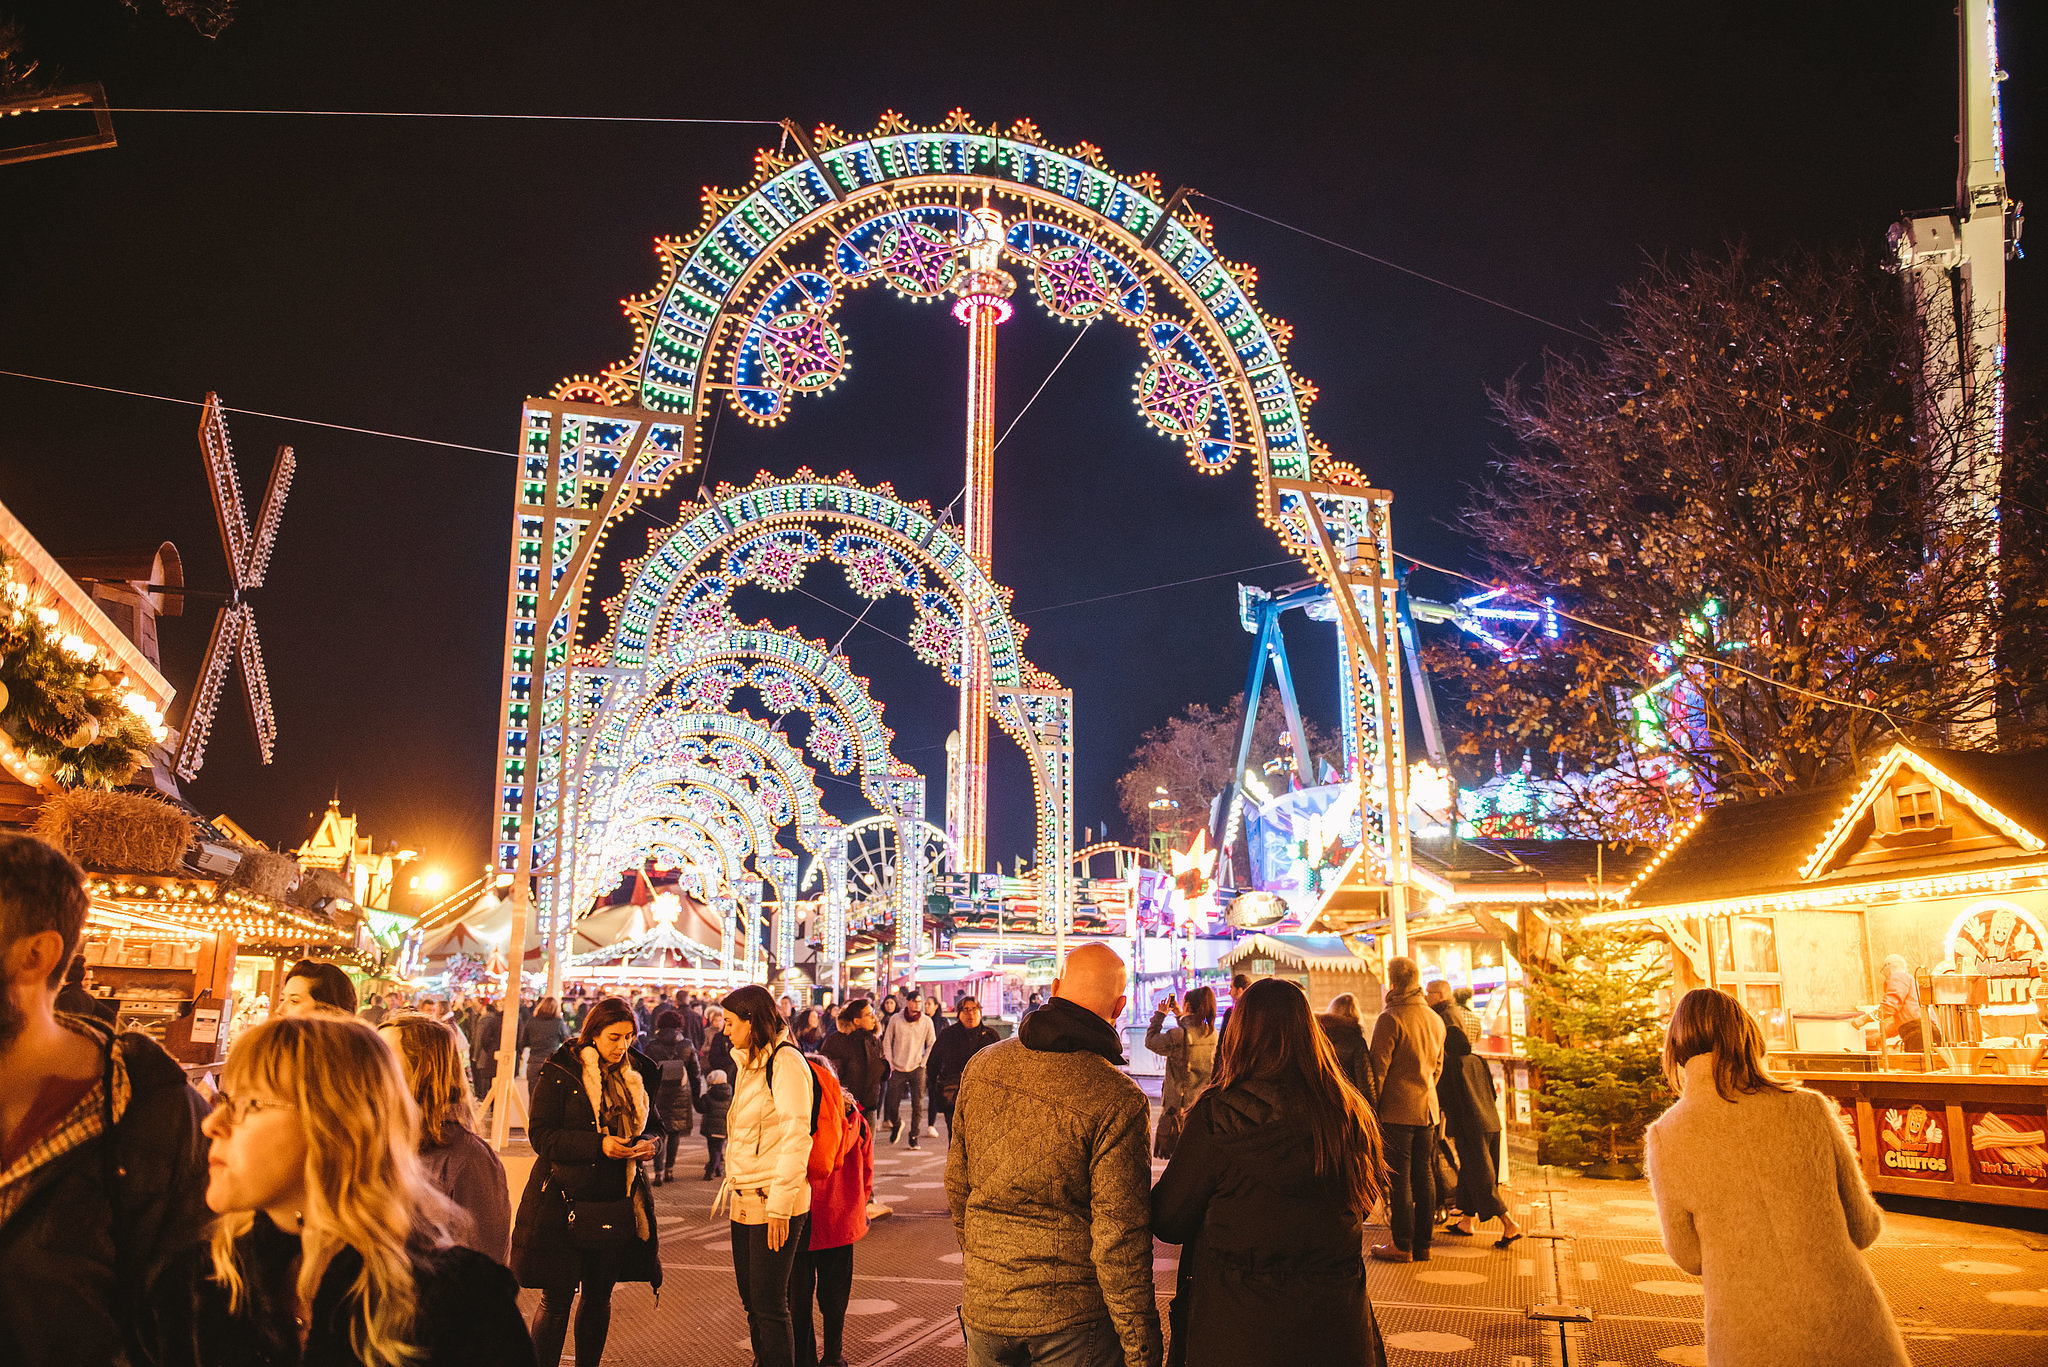 Winter Wonderland London 2021: all the info about the Christmas attraction